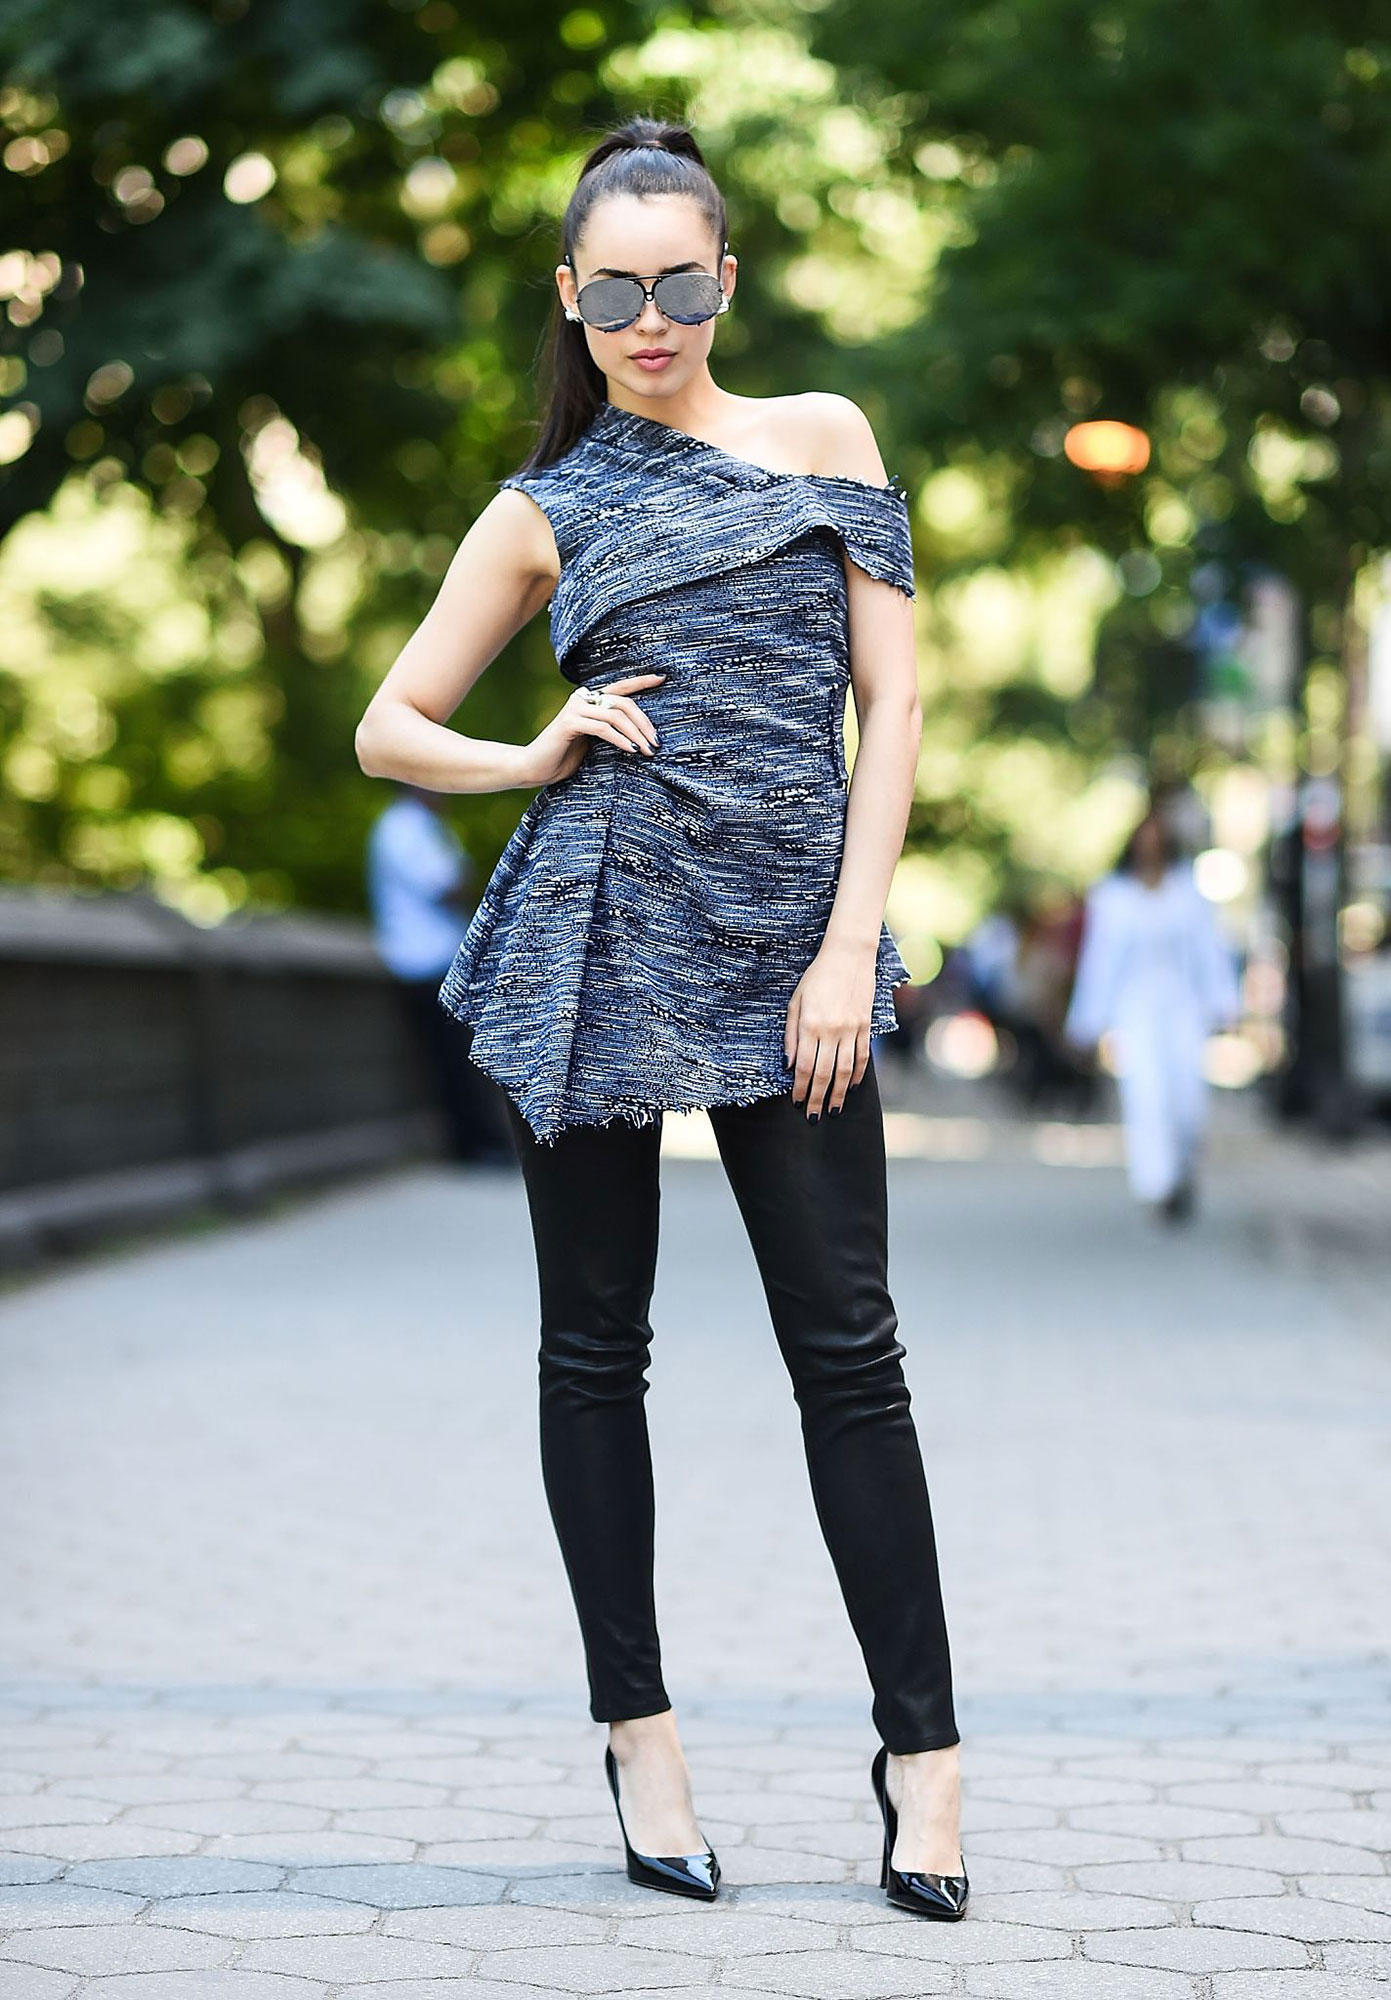 Sofia Carson is seen on the streets of New York